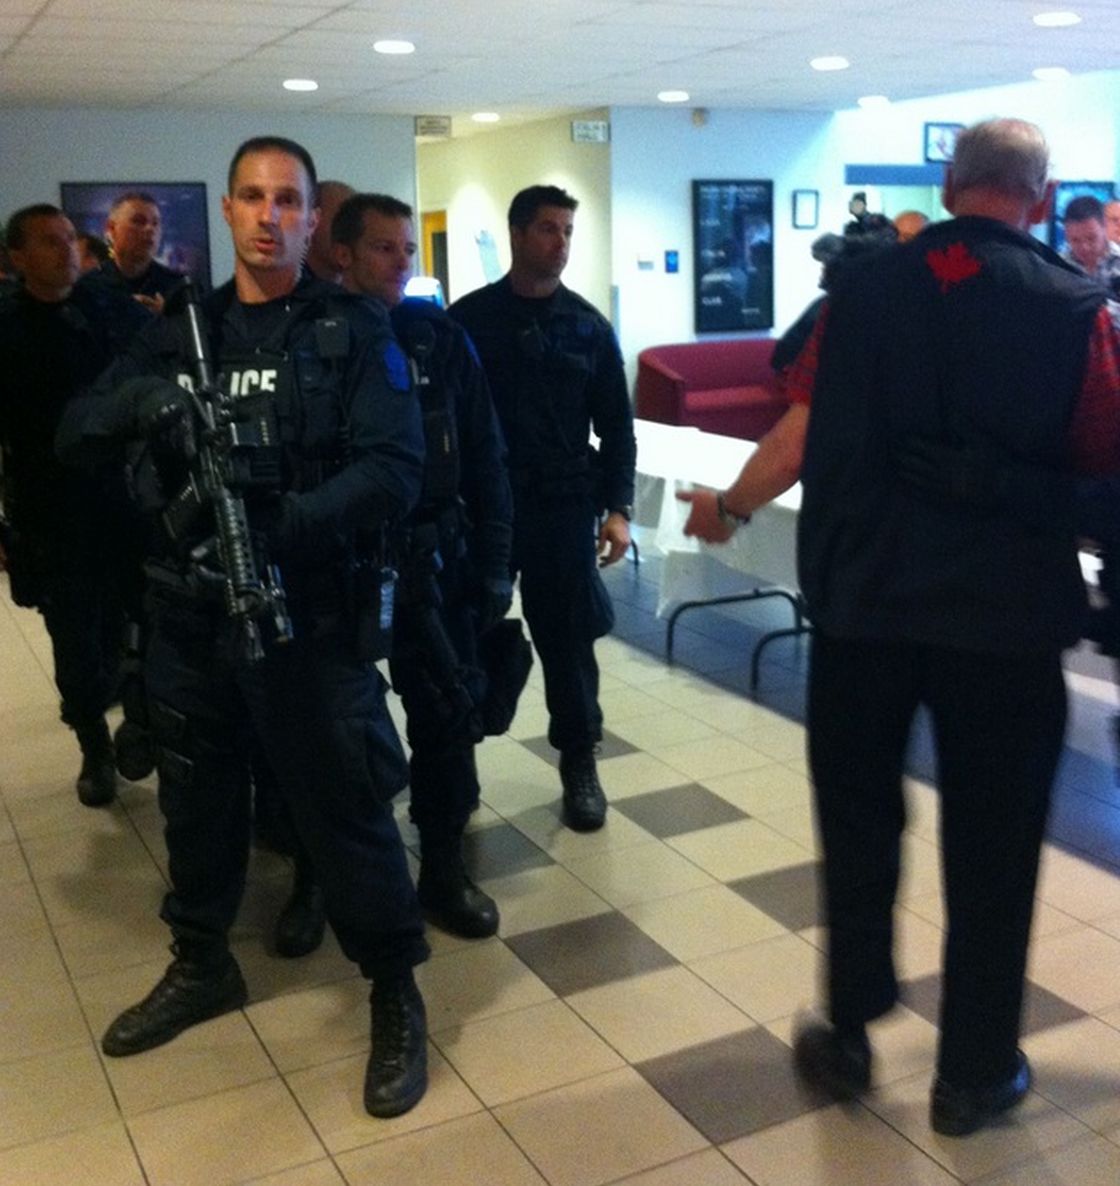 SWAT team at a meeting in Edmonton about PDD cuts, May 29, 2013.